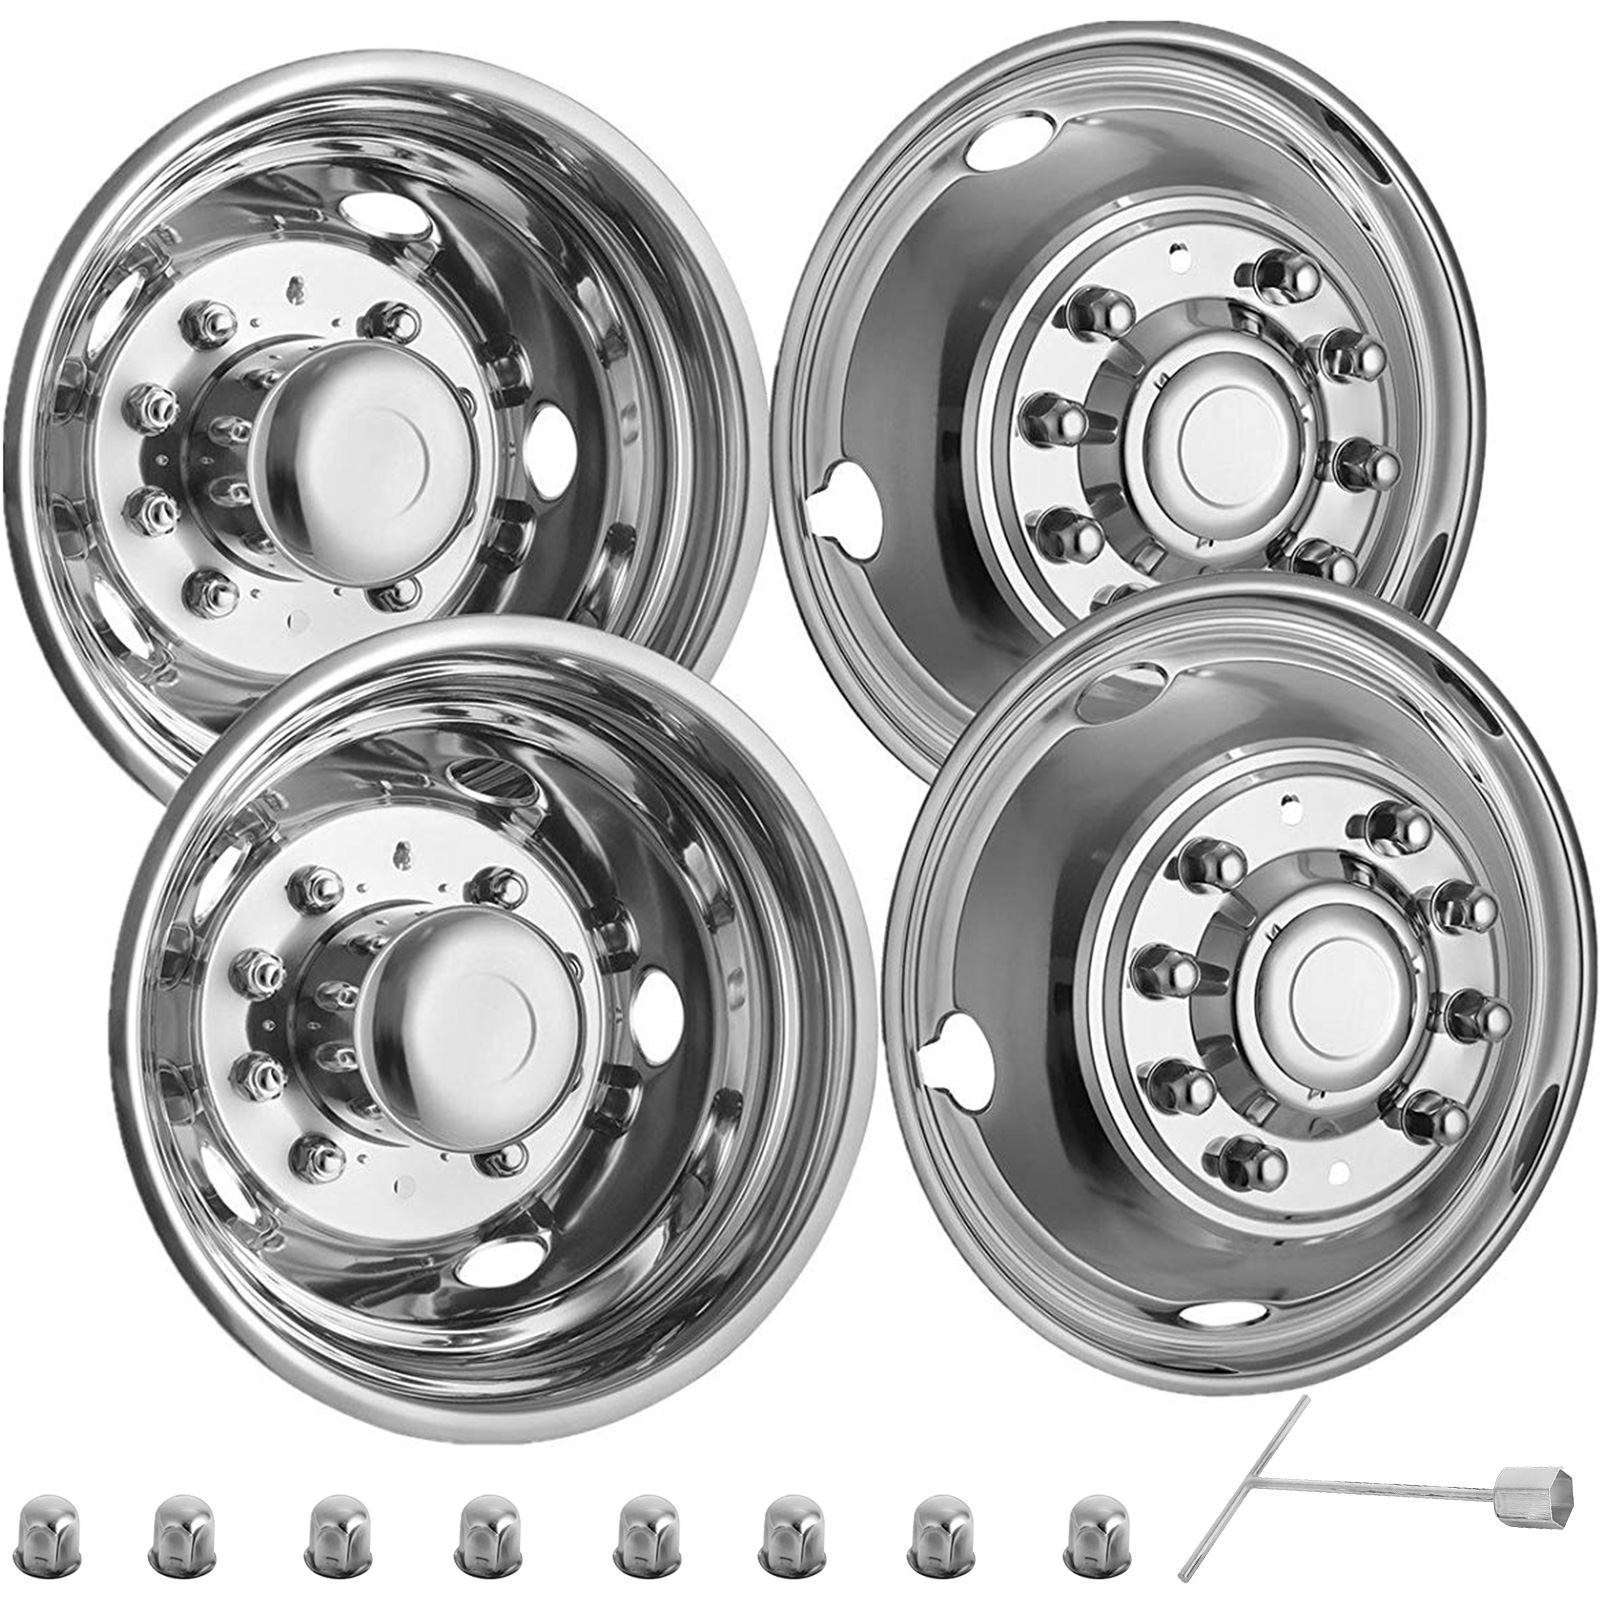 For Ford F450 F550 19.5" 05-20 Stainless Dually Wheel Simulators Bolt On 10 Lug от Vevor Many GEOs